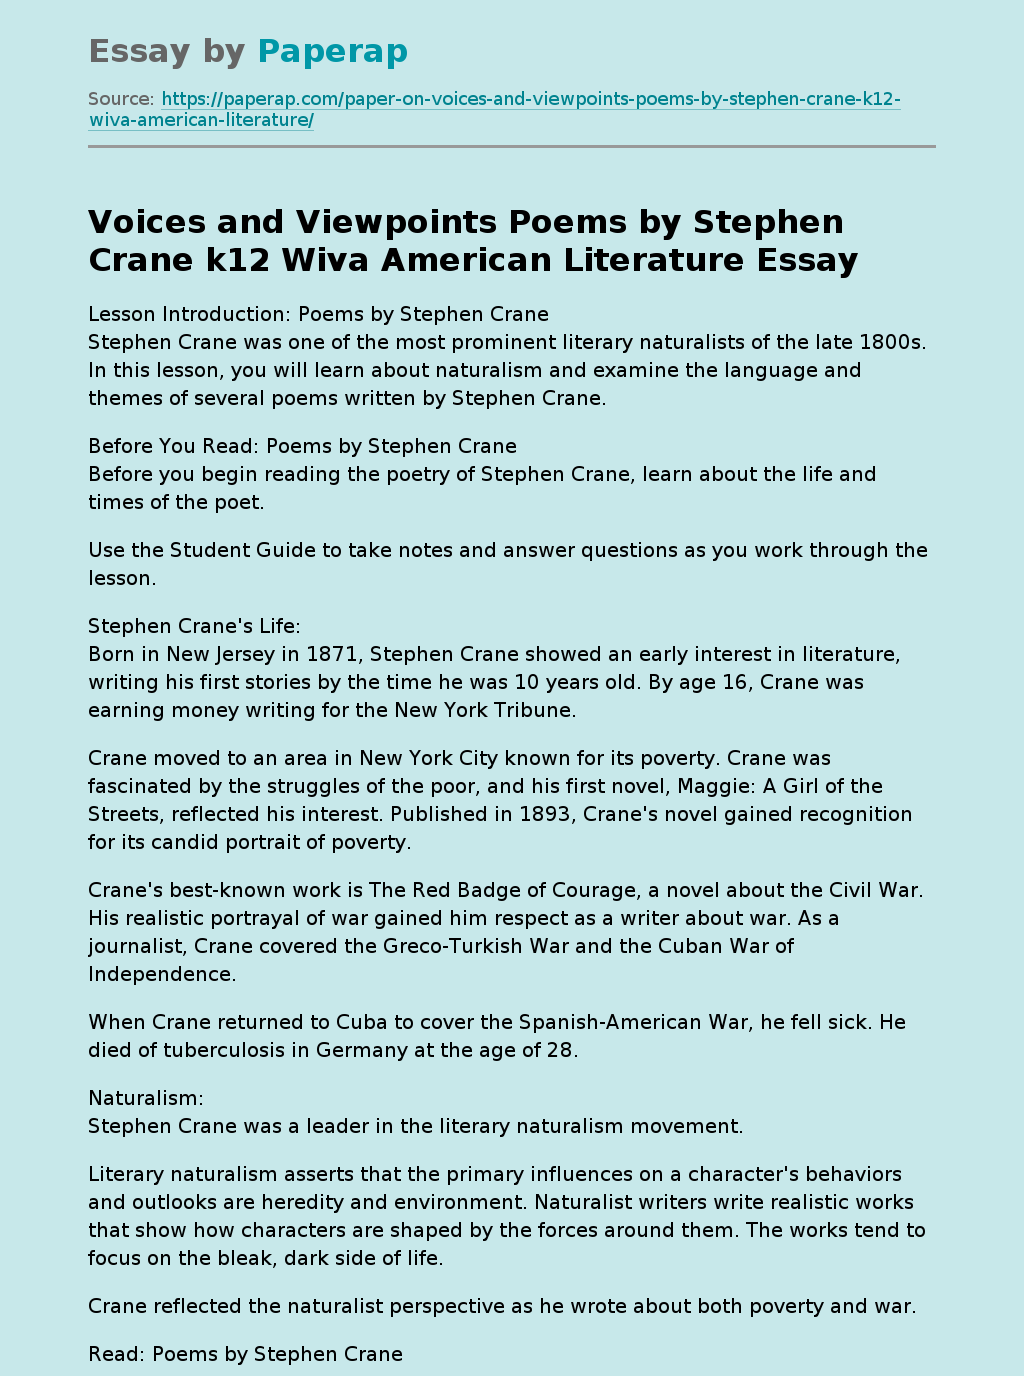 Voices and Viewpoints Poems by Stephen Crane k12 Wiva American Literature